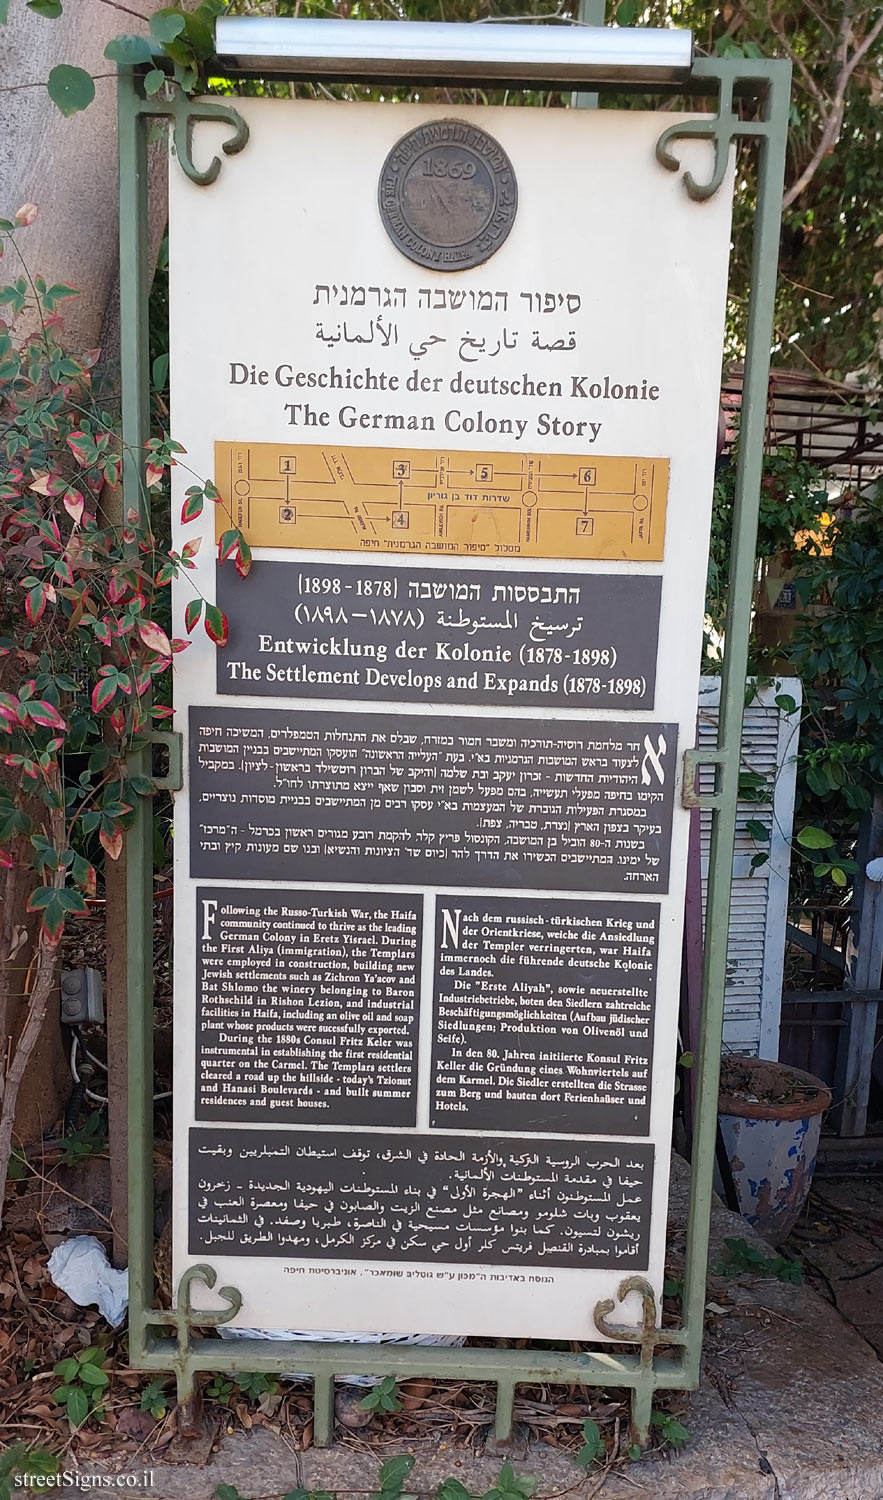 Haifa - The German Colony Story - The Settlement Develops and Expands